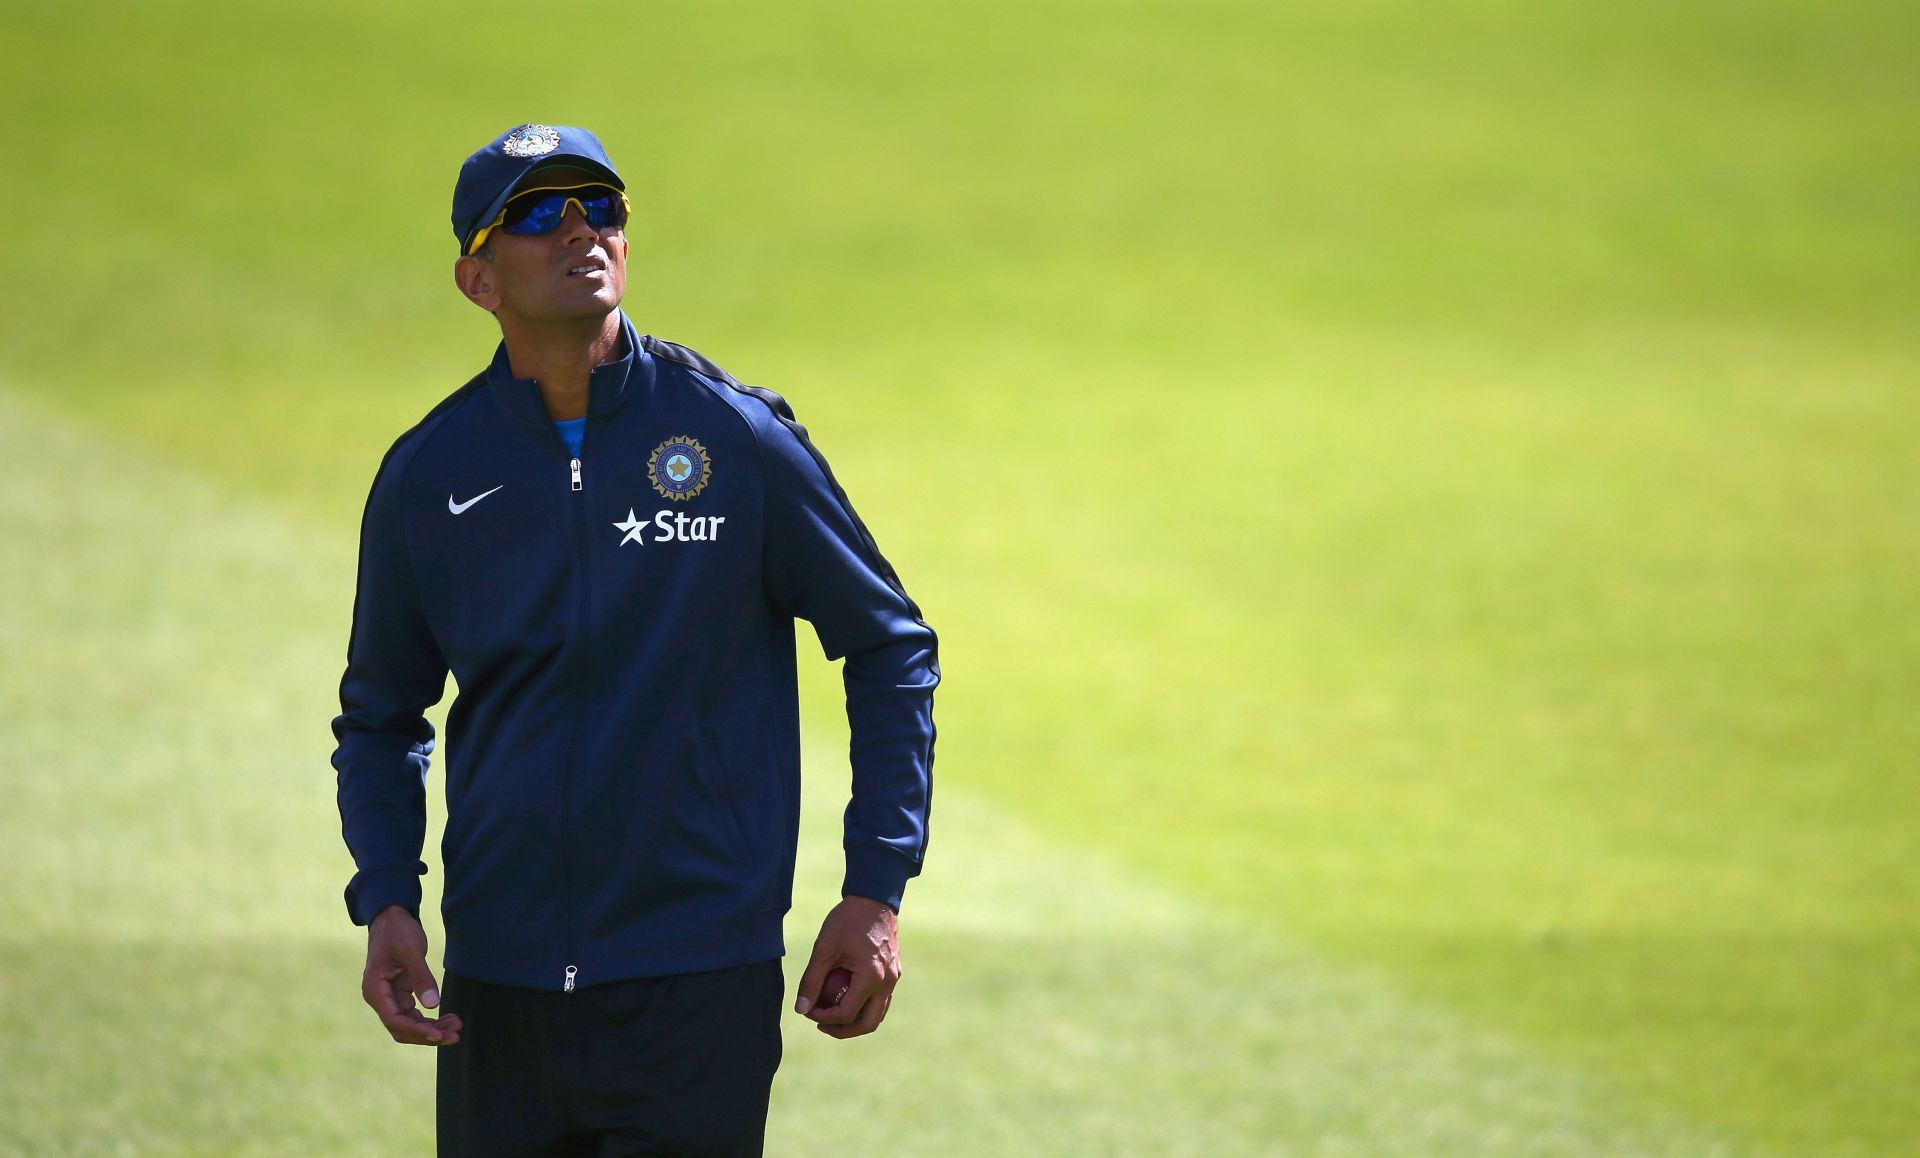 Rahul Dravid has plenty of challenges waiting to be tackled